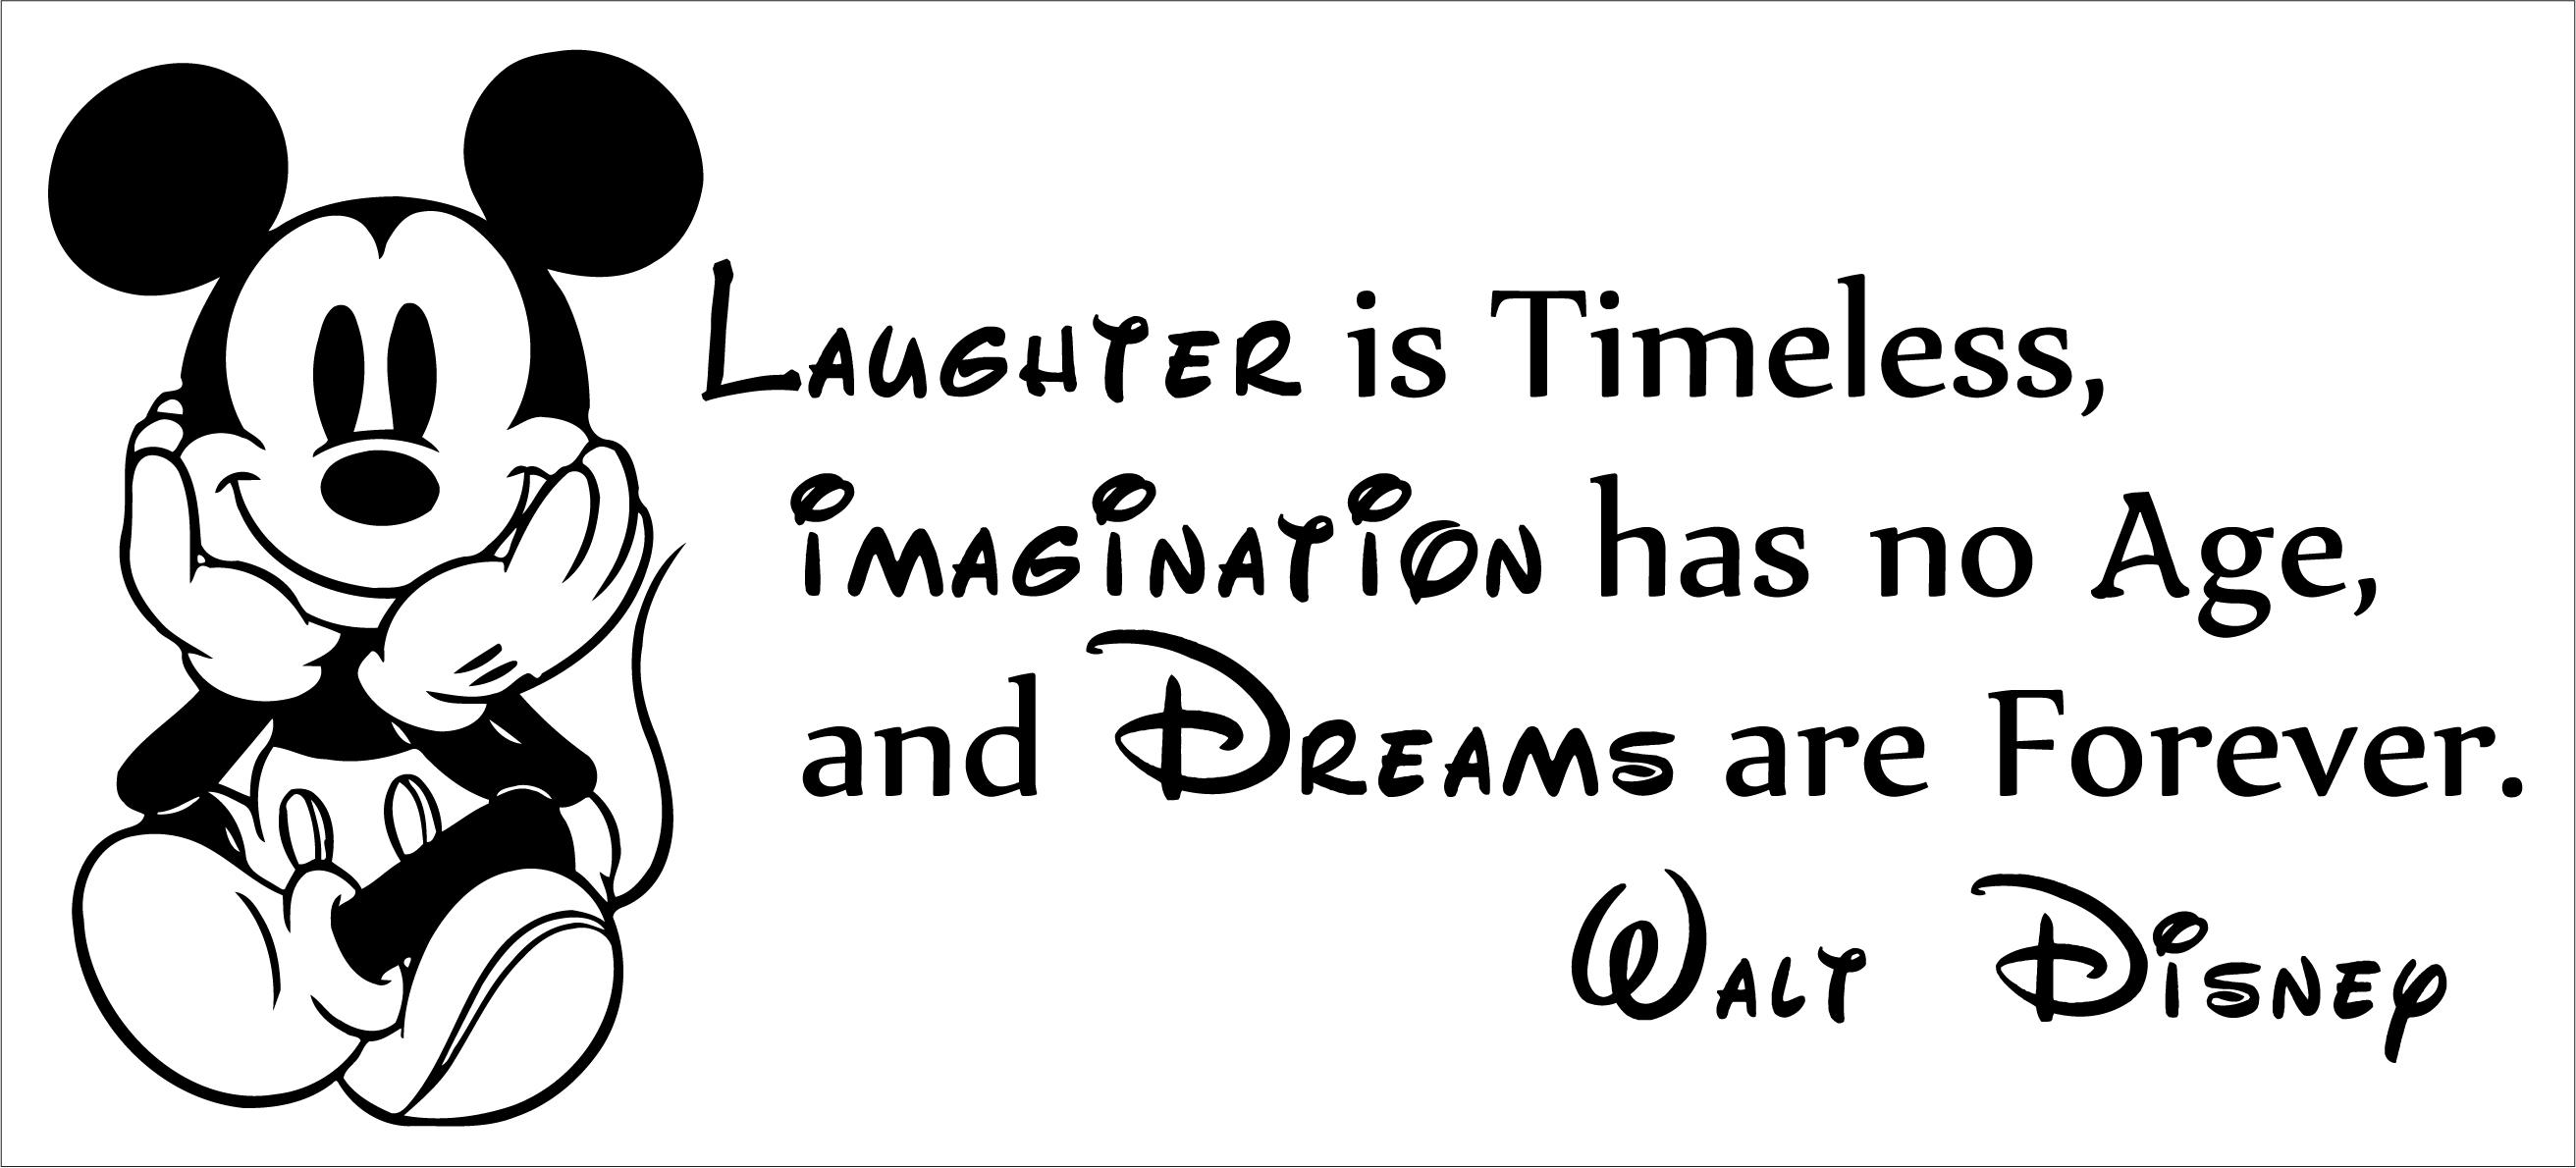 Wall Stiker Walt Disney Quote for Nursery with Mickey Mouse. Laughter